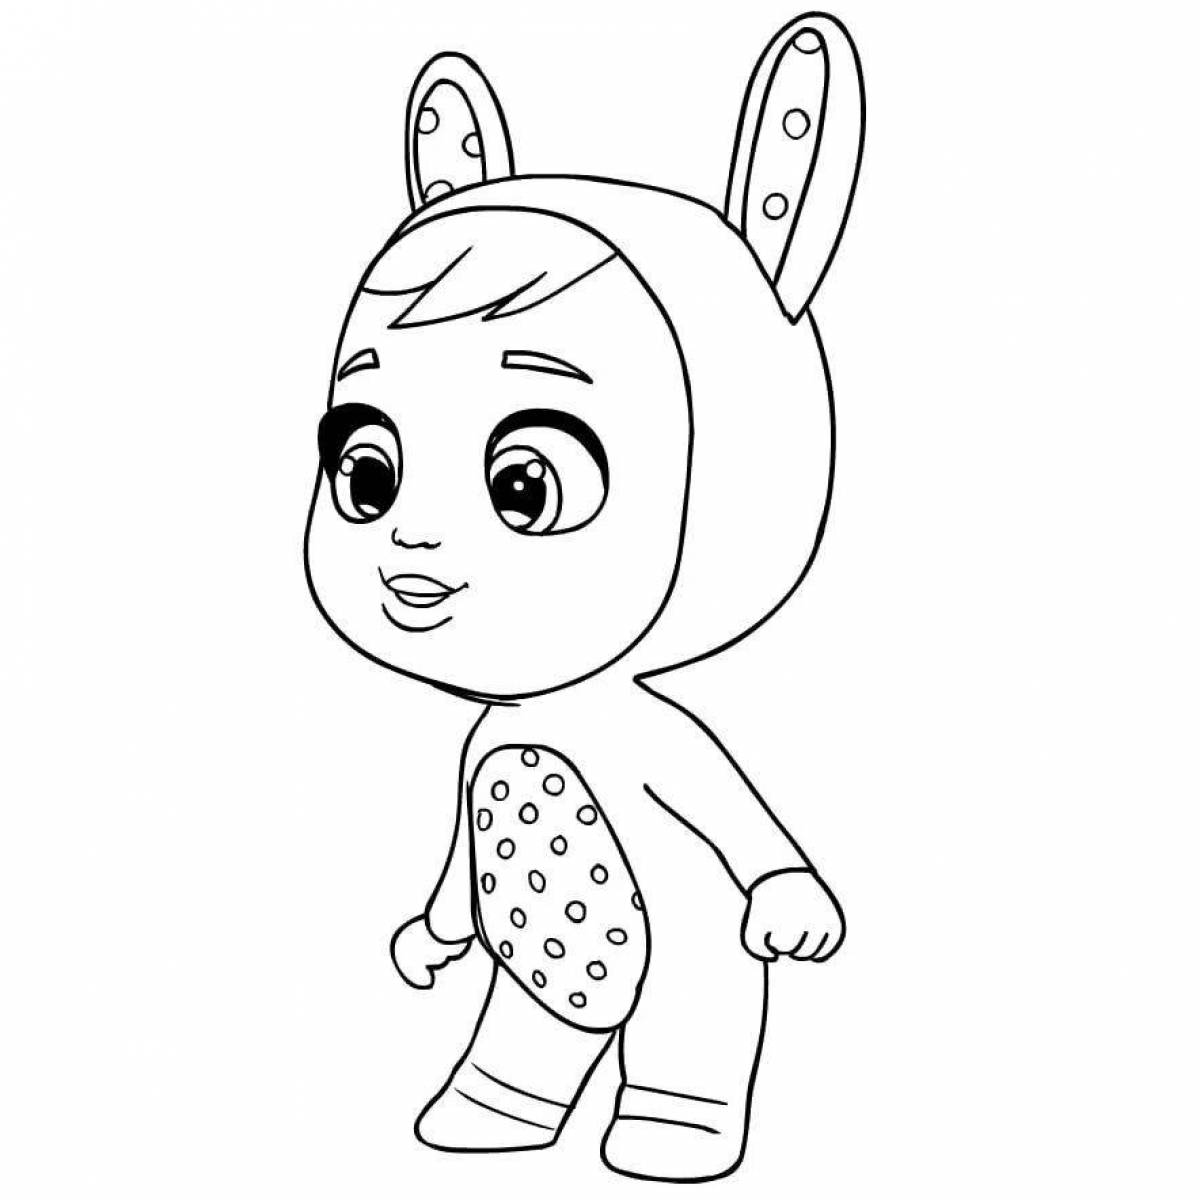 Crying children coloring page